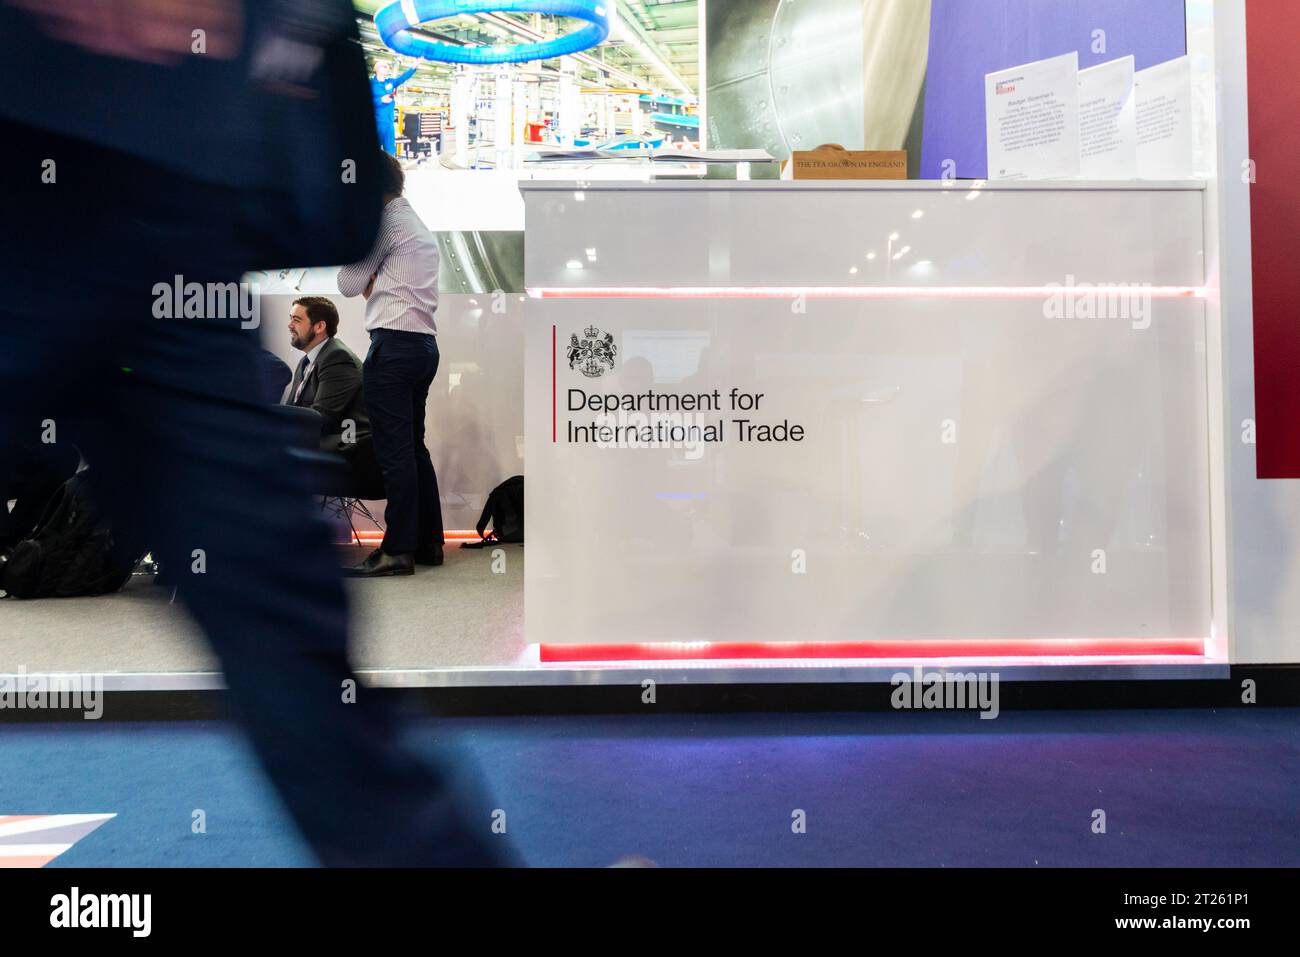 Department for International Trade, DIT, at the Farnborough International Airshow FIA, aviation, aerospace trade show. Brexit government department Stock Photo